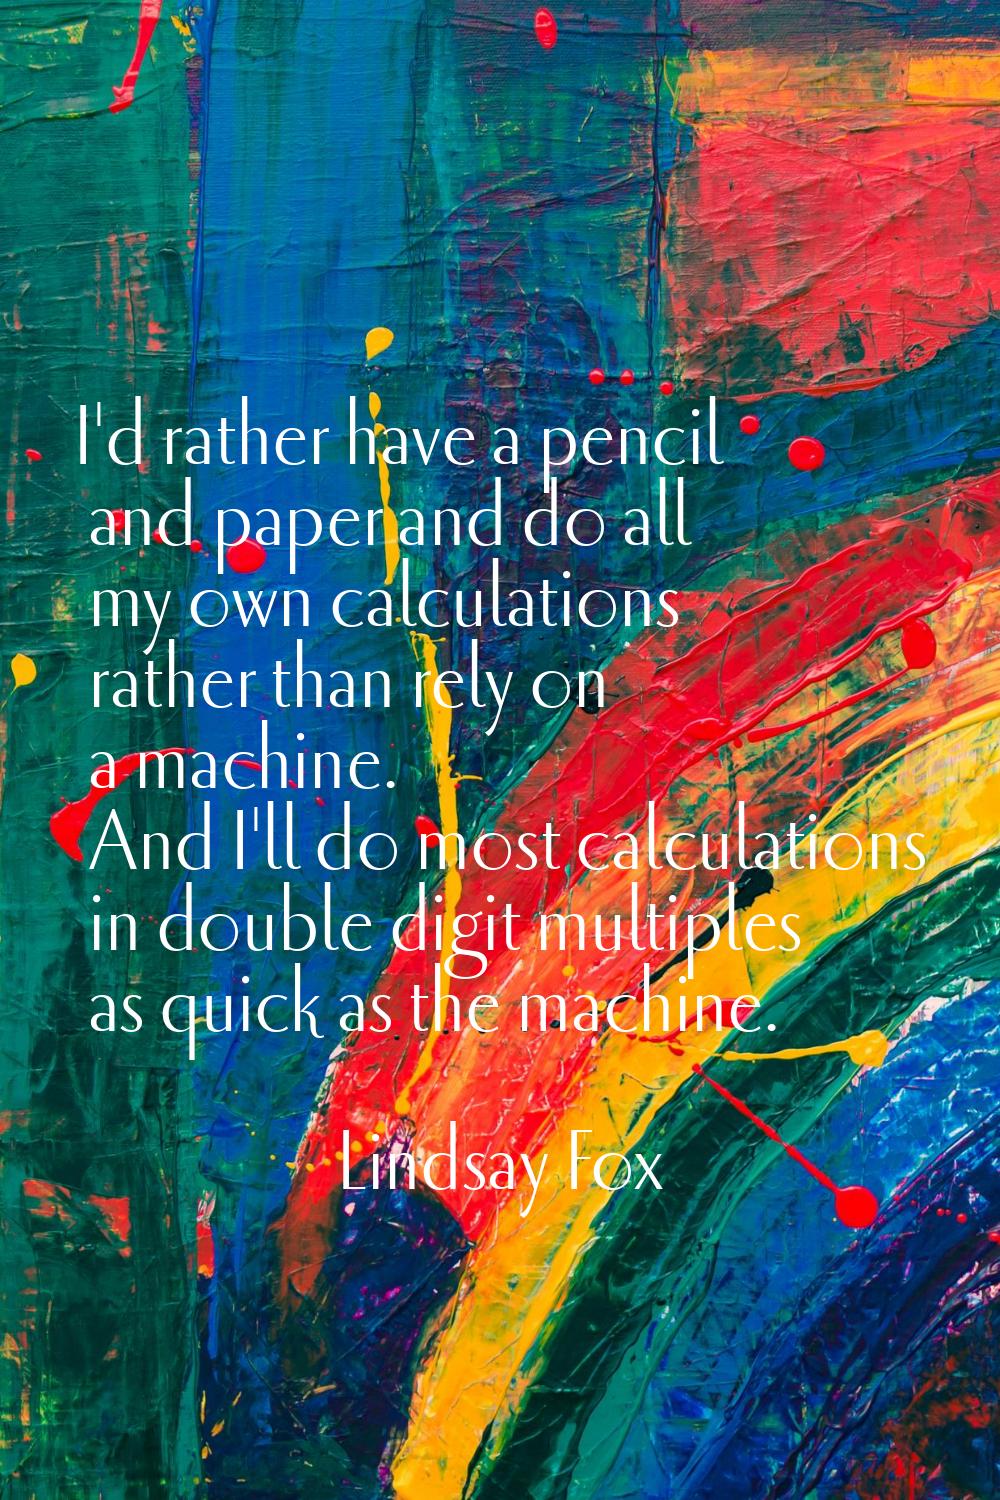 I'd rather have a pencil and paper and do all my own calculations rather than rely on a machine. An